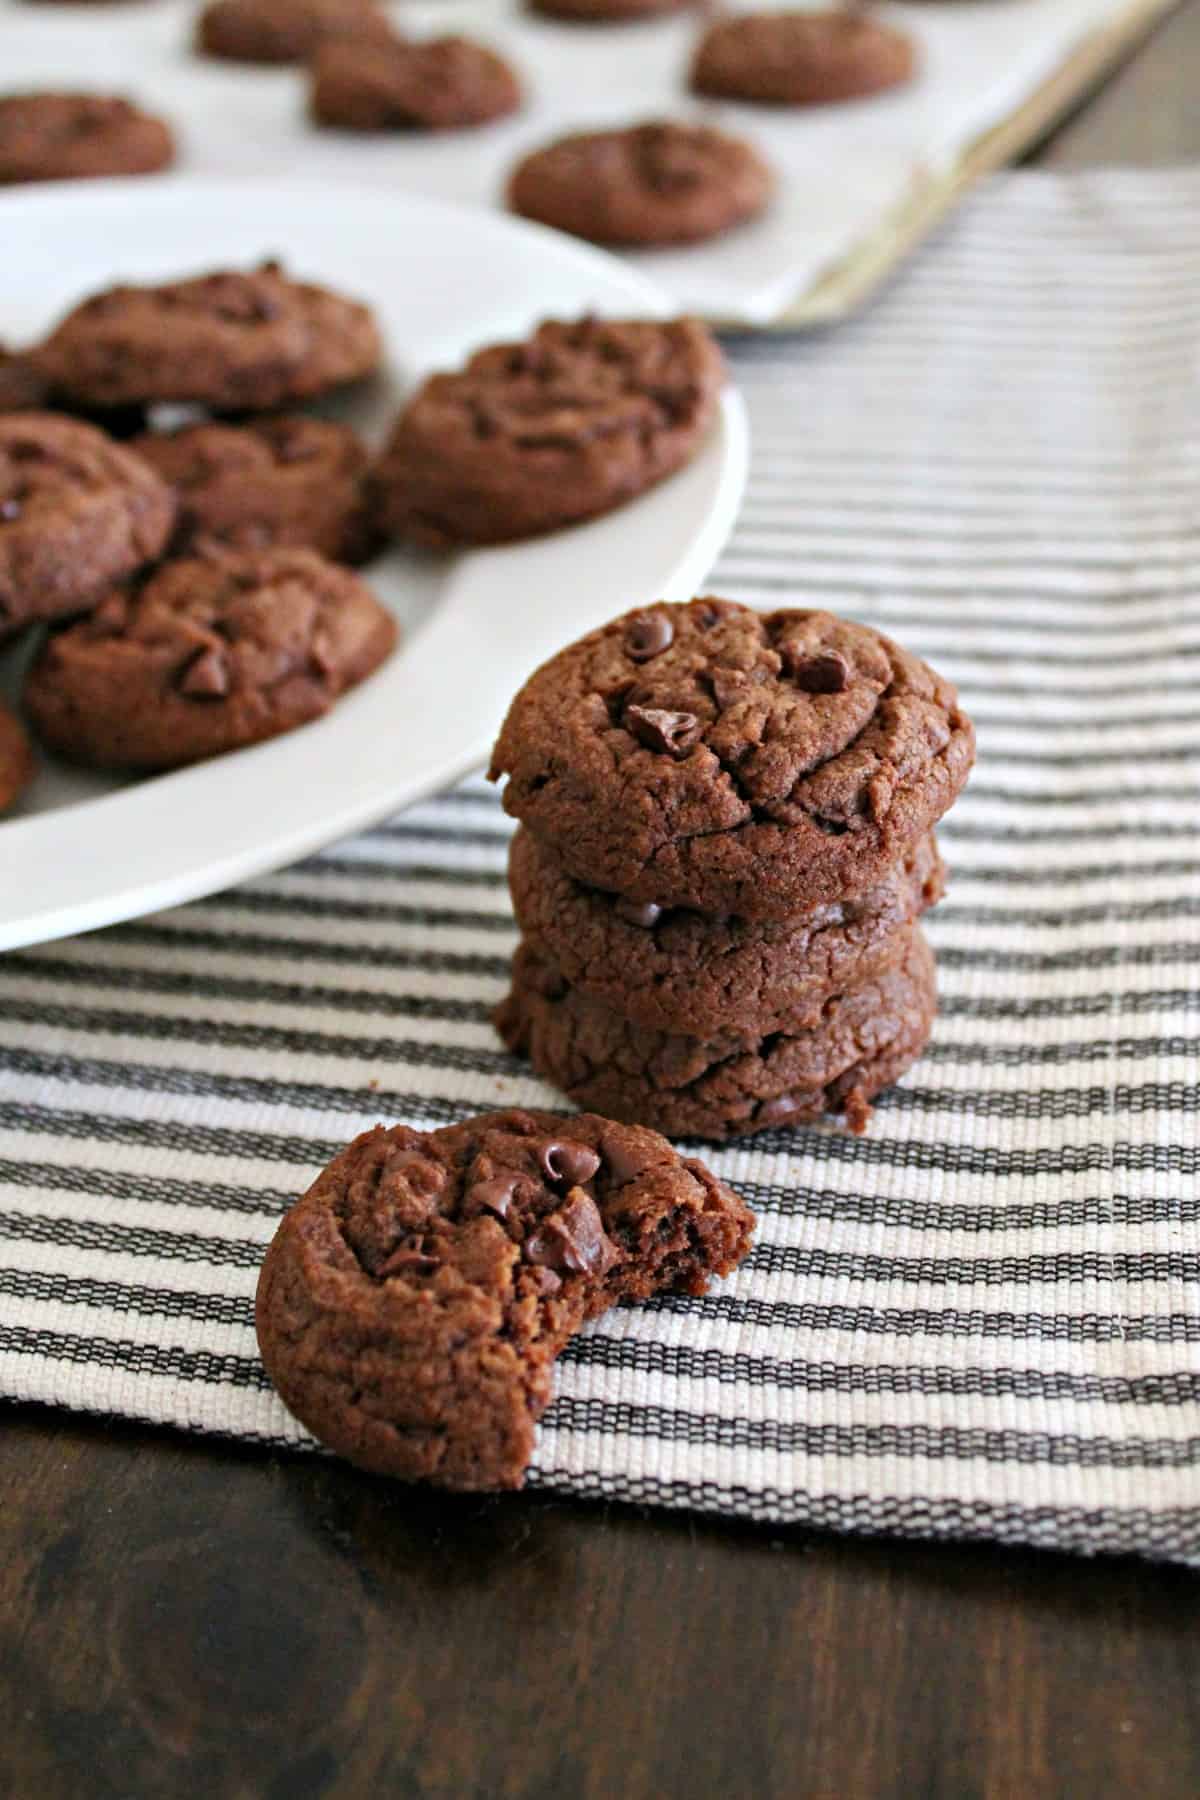 Chocolate Chocolate Chip Cookies! These cookies are a deep, chocolaty, mini-chip-studded version of my favorite chewy chocolate chip cookie recipe! Made with melted butter and requiring no chilling time, they're an easy recipe to whip up for last minute gatherings or any celebration! 